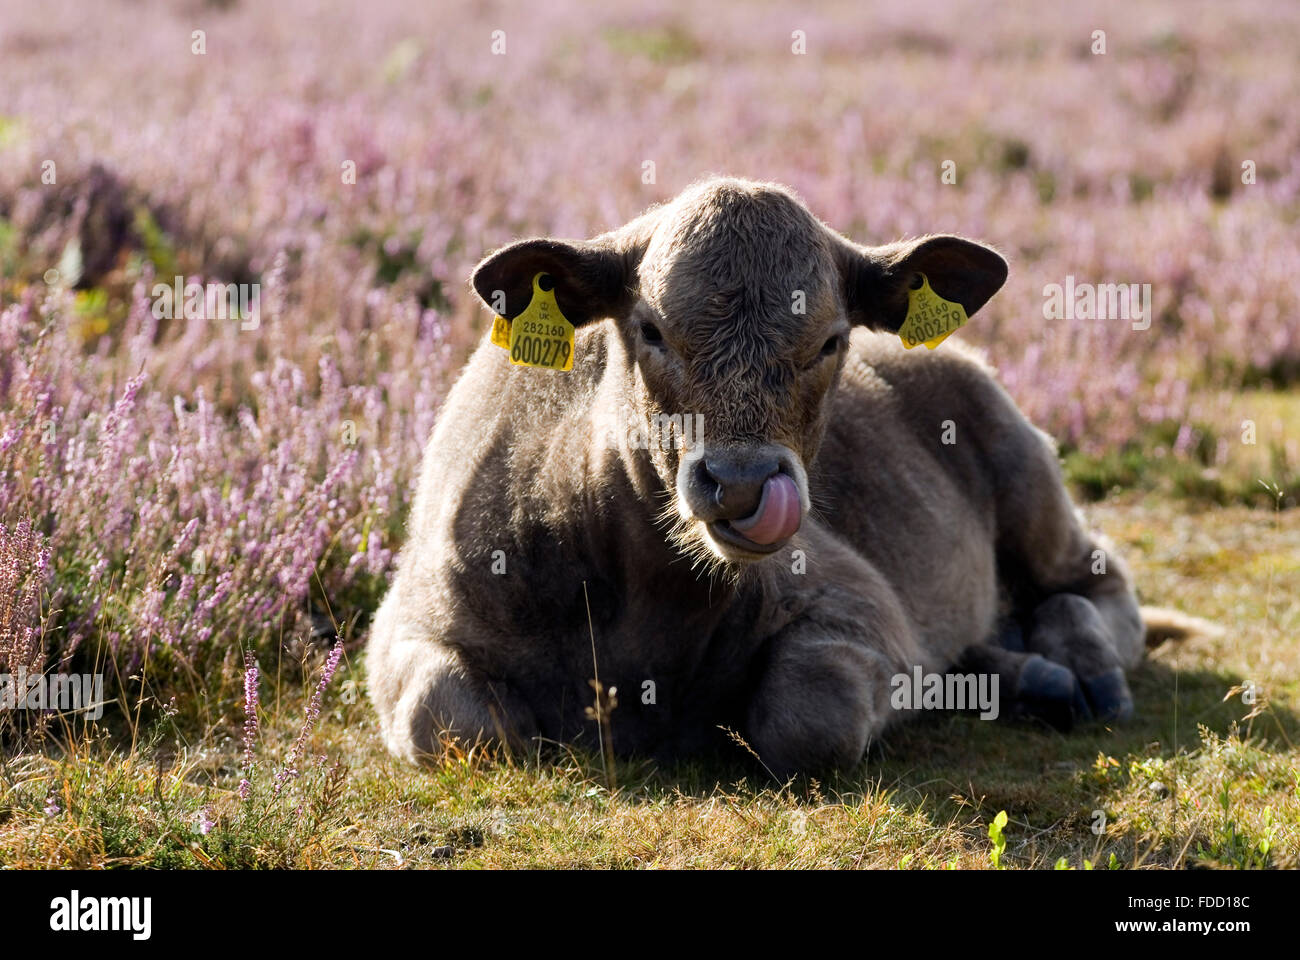 Kuehe im New Forest, Dorset, England, Europa | Cows in New Forest, Dorset, Great Britain, Europe Stock Photo